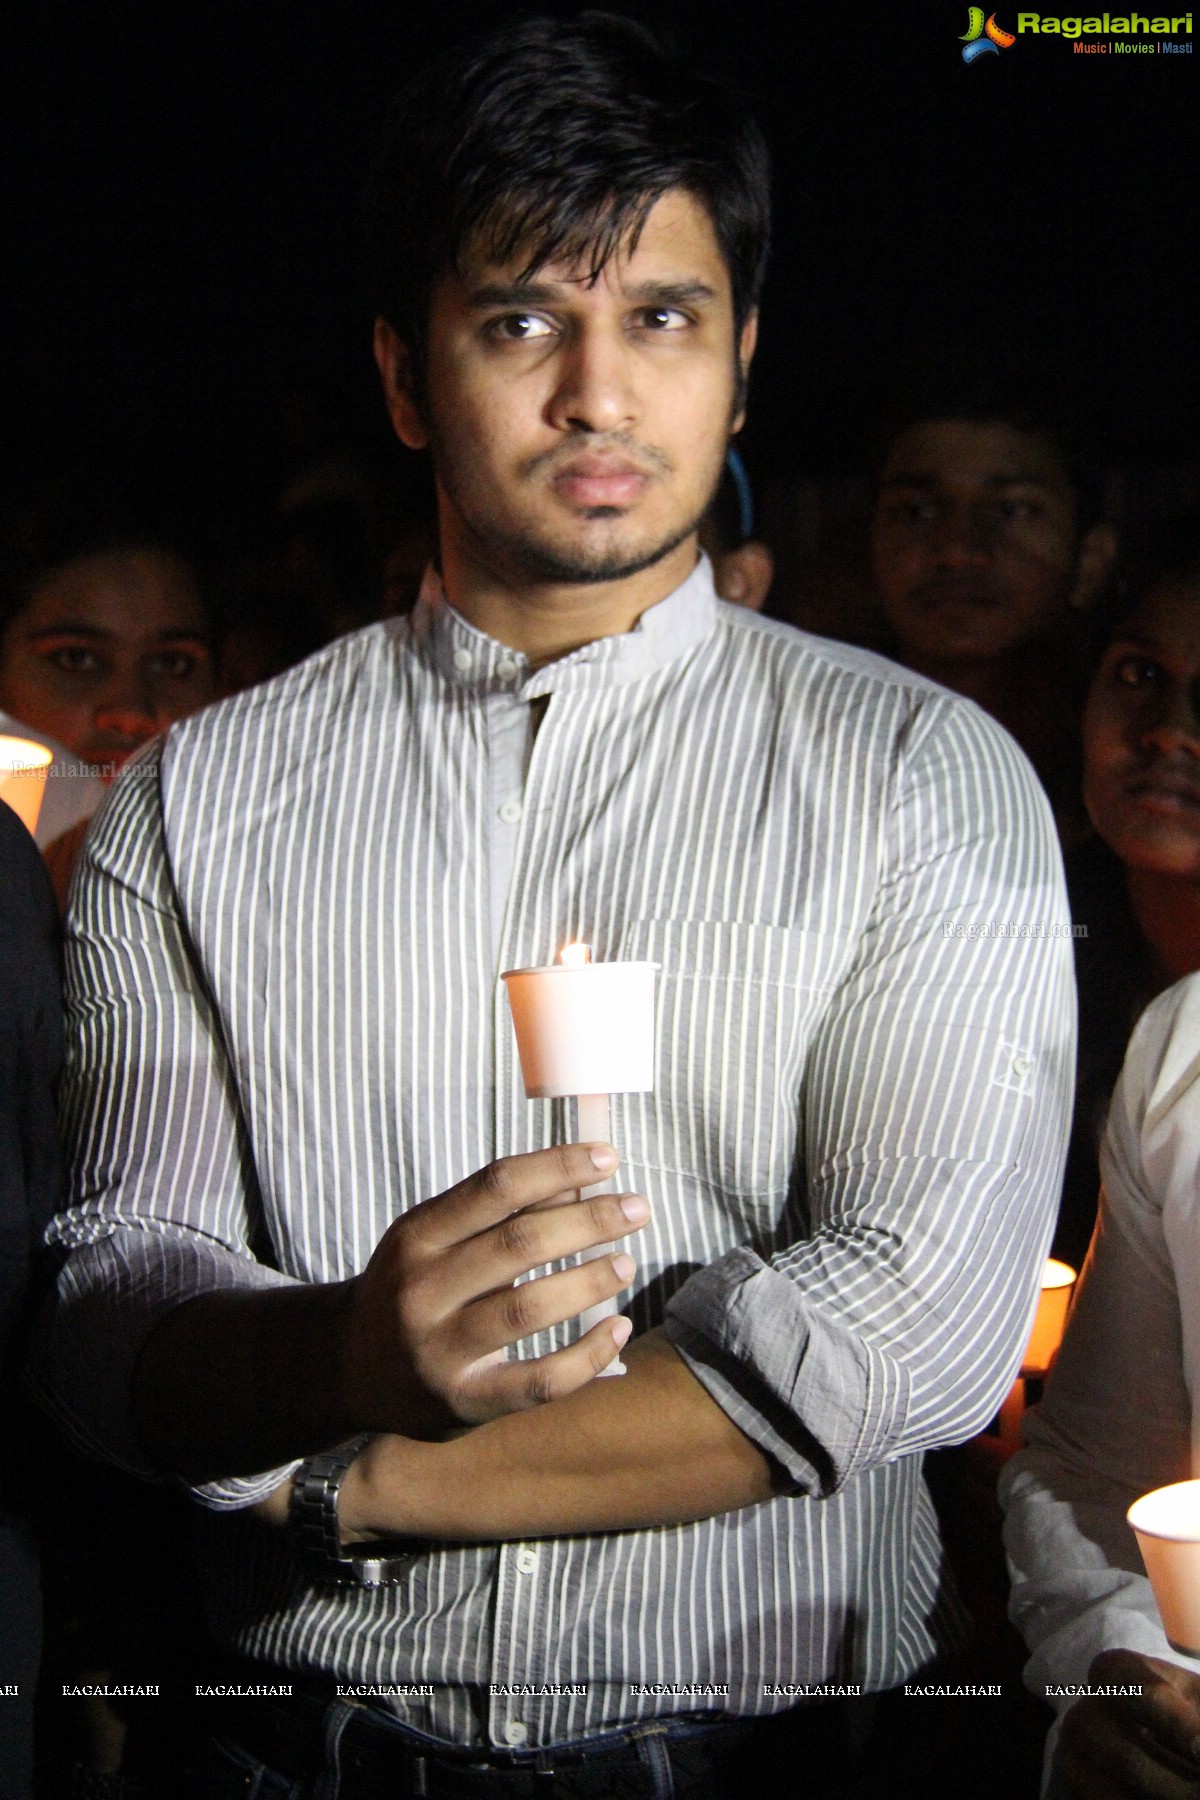 Candle Light March for VNR Students who expired in Industrial Tour